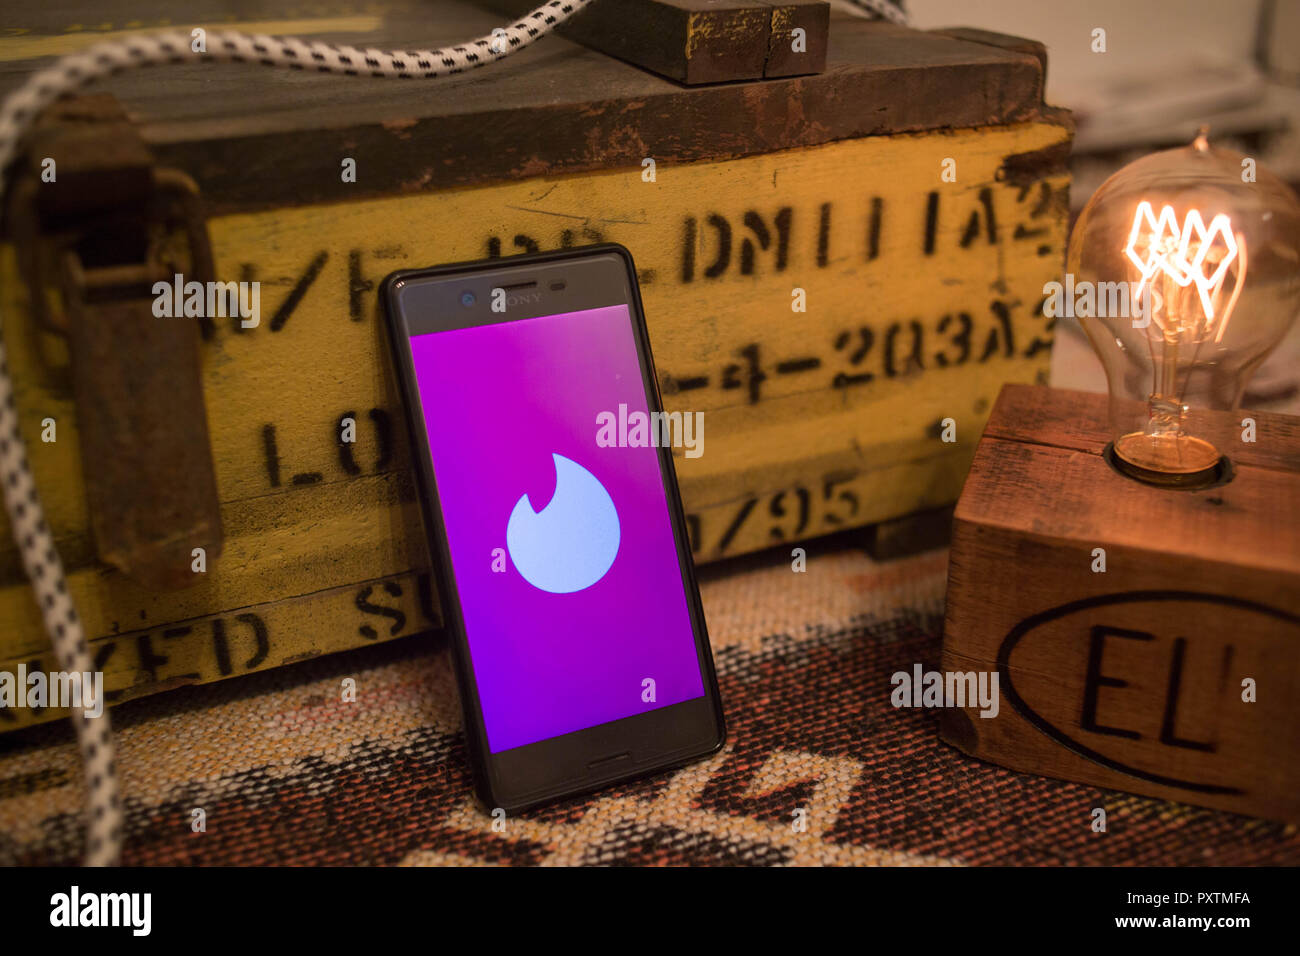 The Tinder application seen displayed on a Sony smartphone. Stock Photo